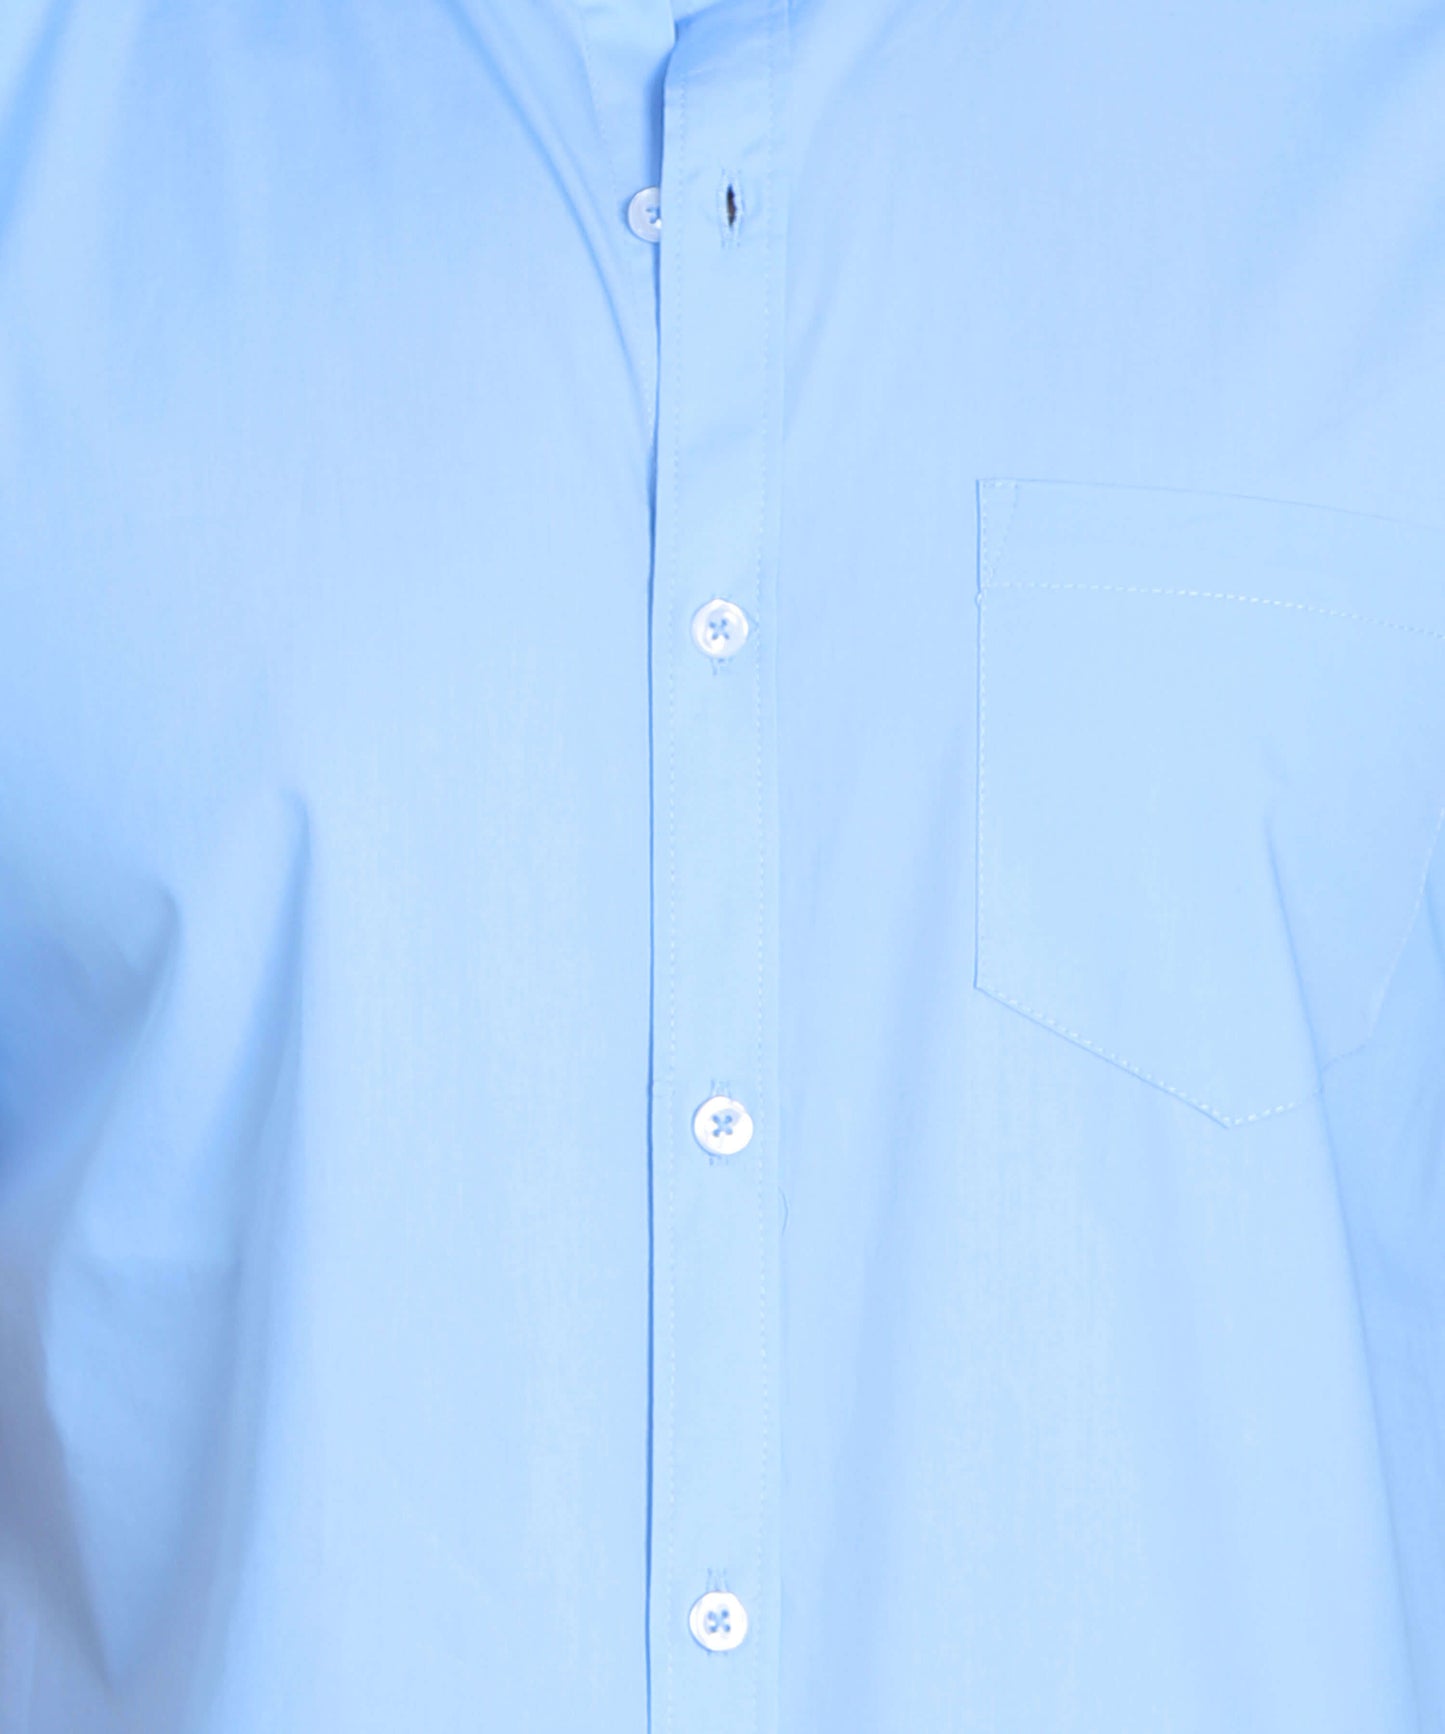 5thanfold Men's Casual Pure Cotton Half Sleeve Solid Sky Blue Slim Fit Shirt